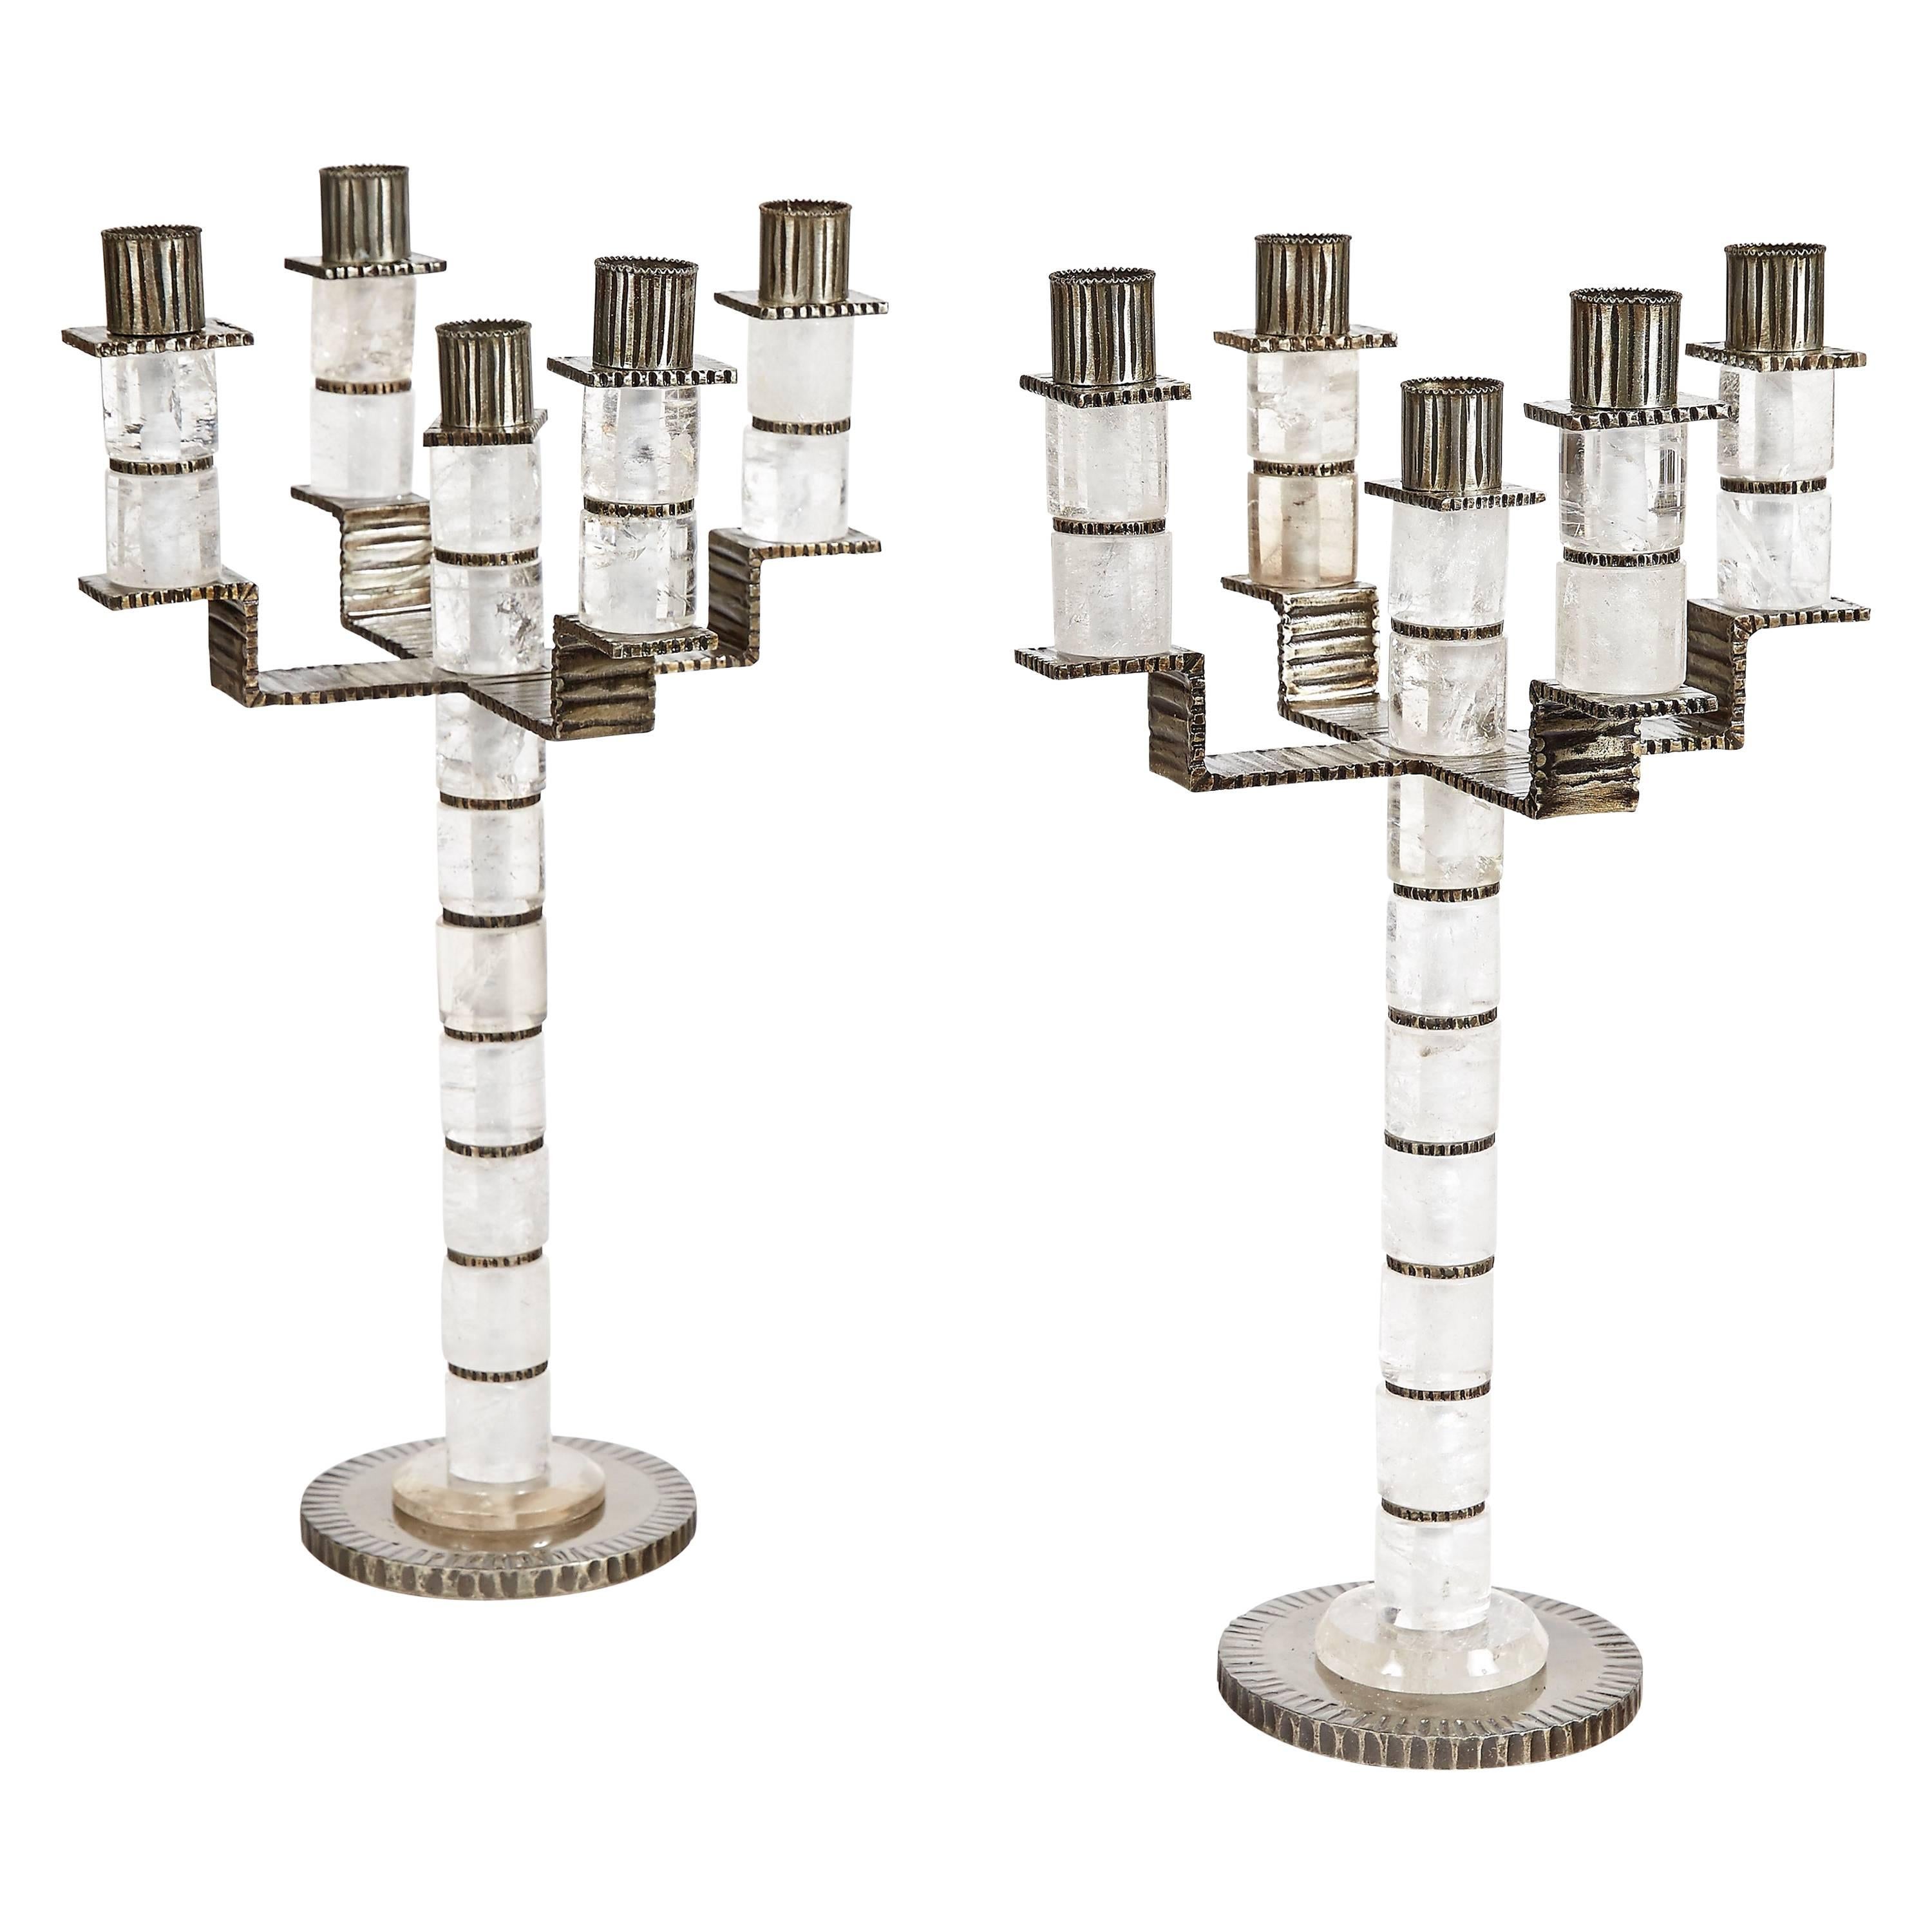 A Pair of Five Branches Candelabra by Sylvain Subervie, 2003